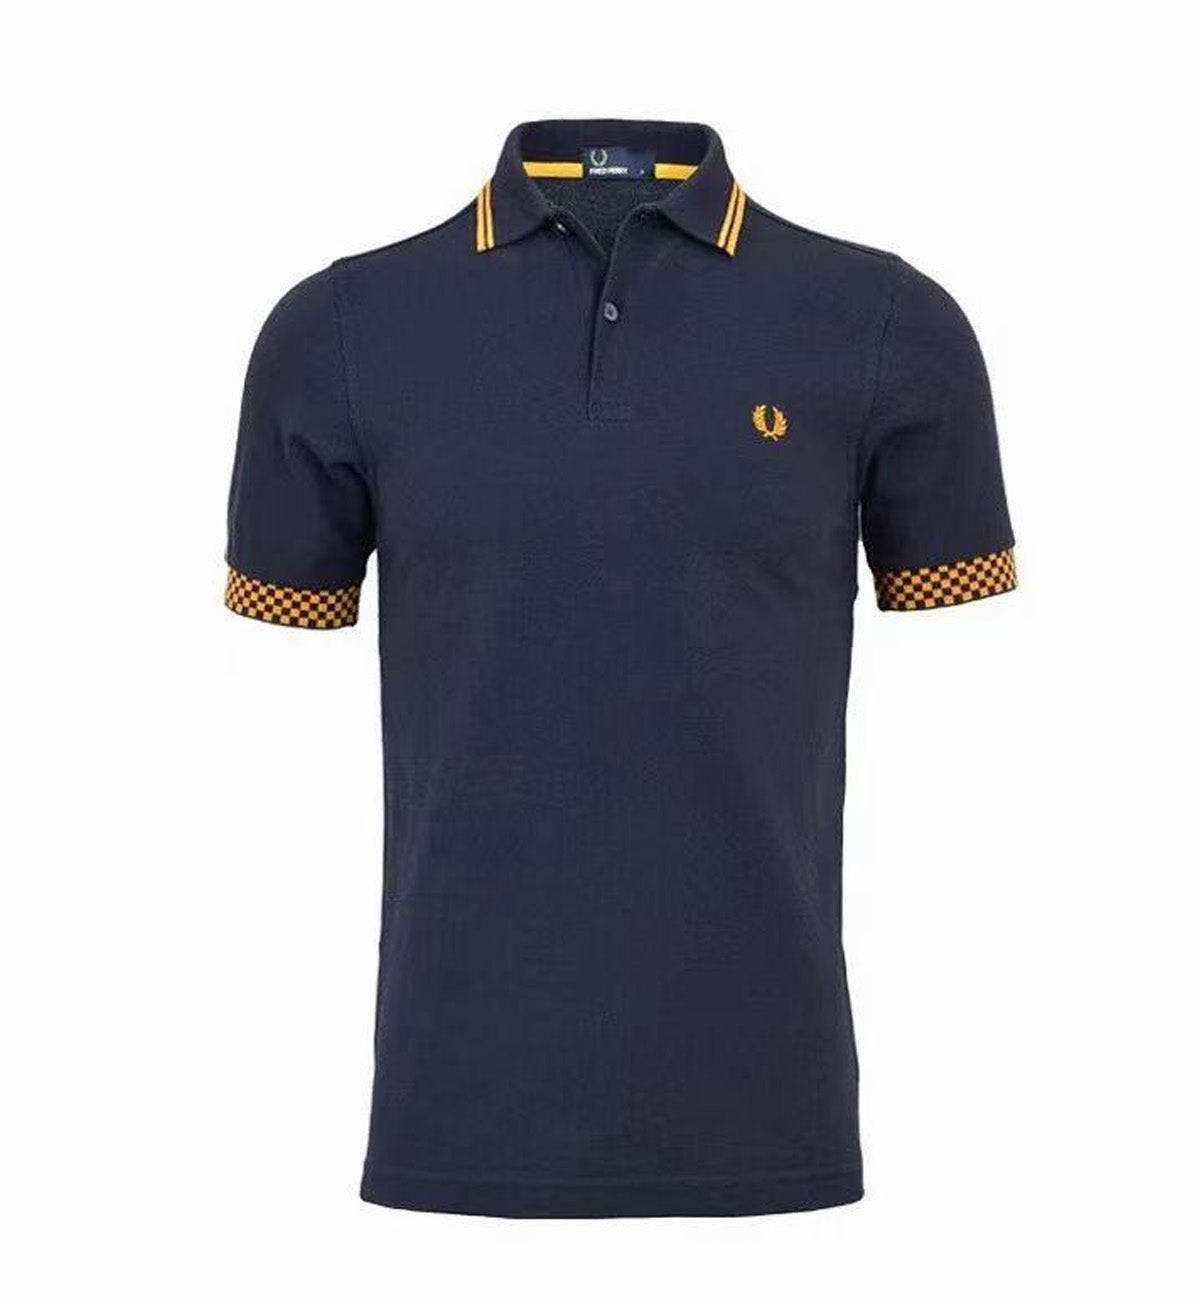 Fred Perry Gold Stripe with Plaid Sleeve Navy Blue Polo Shirt